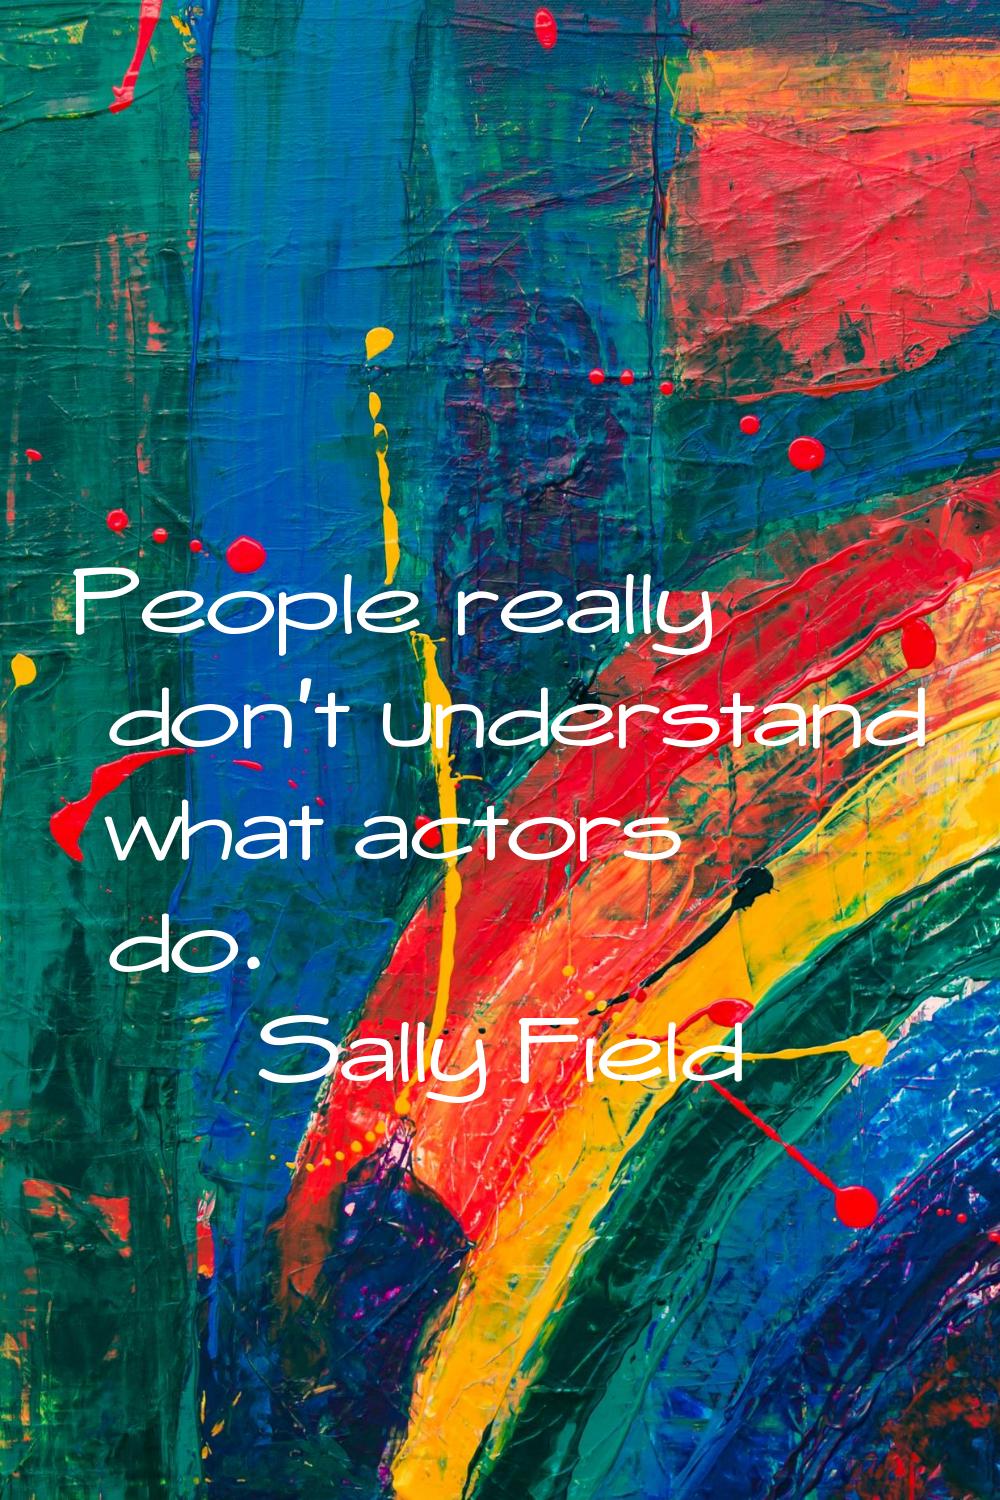 People really don't understand what actors do.